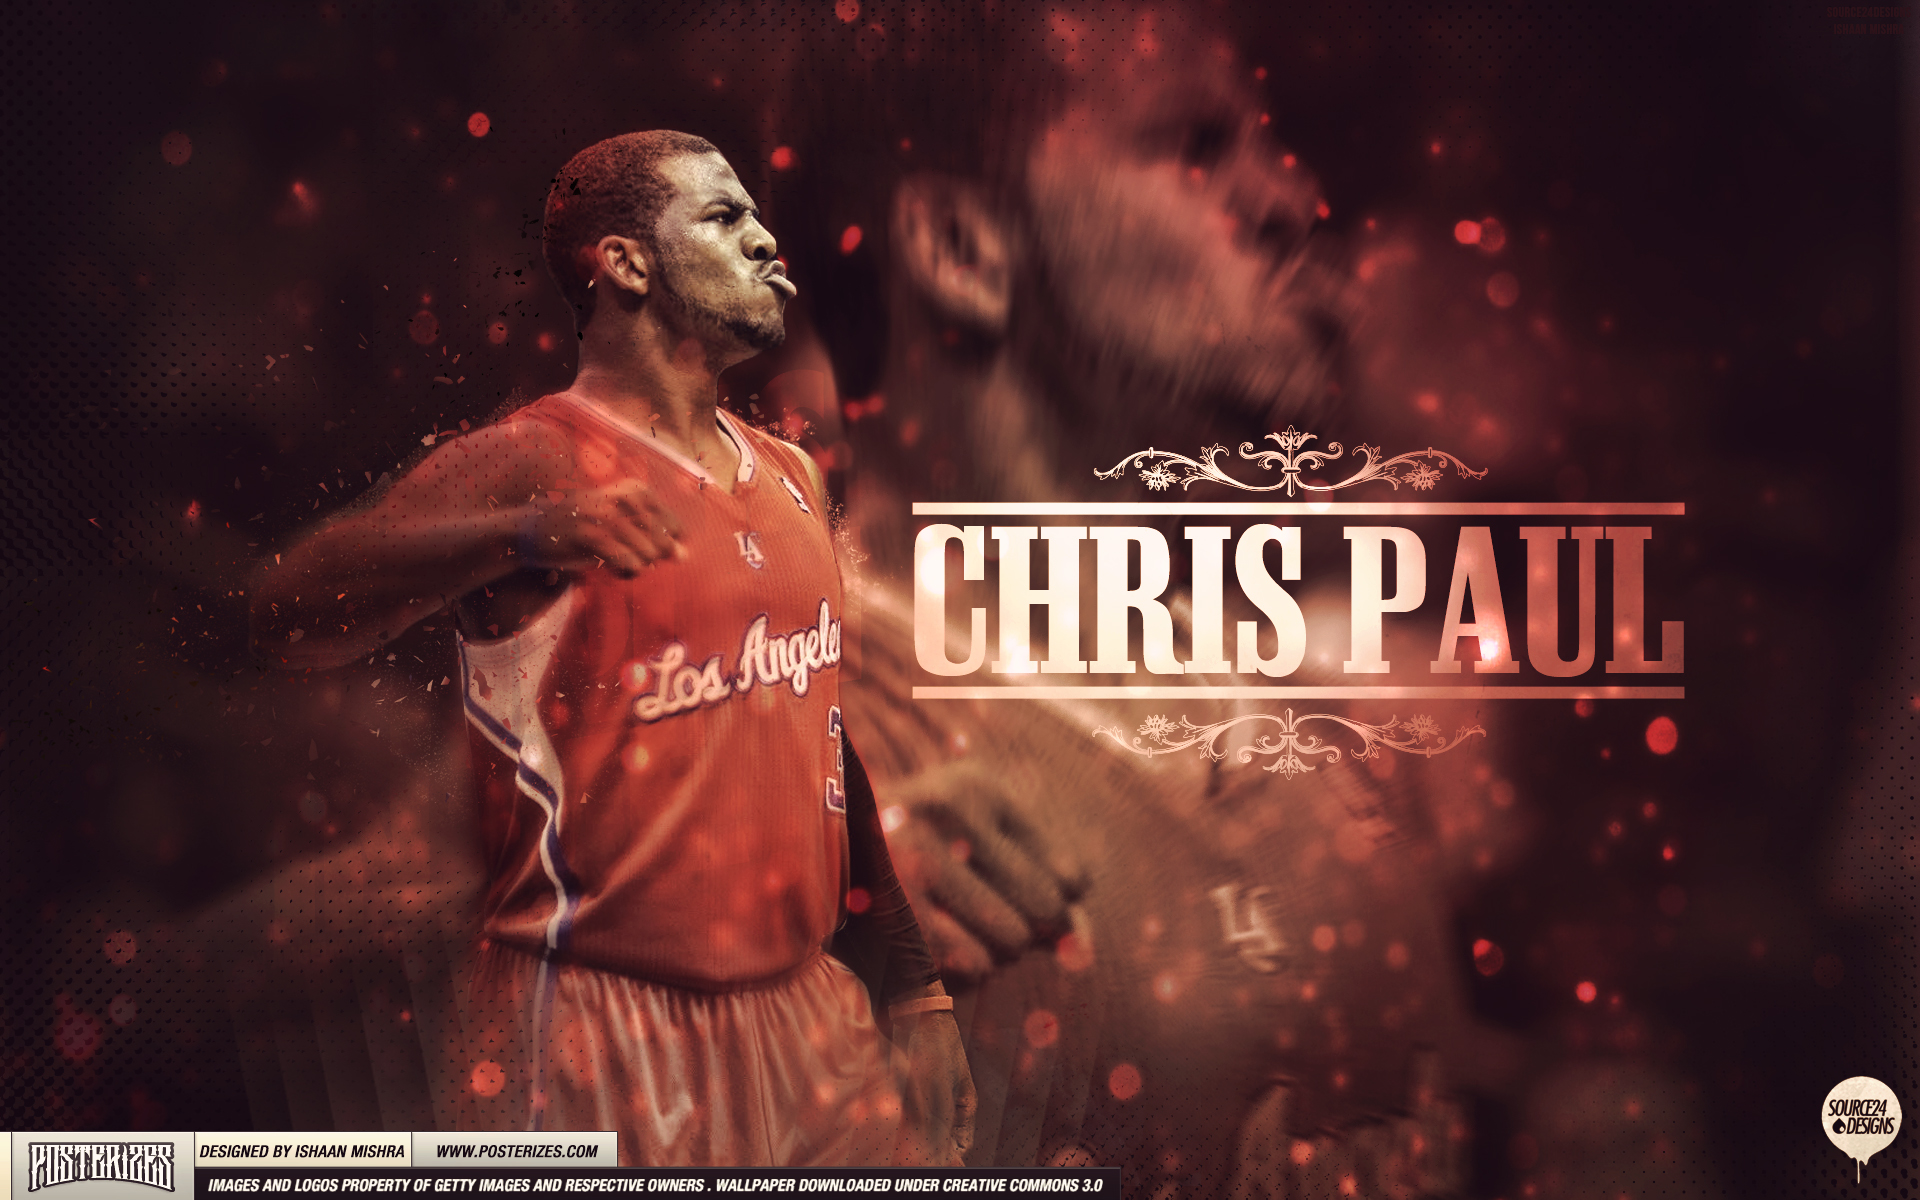 Chris Paul Los Angeles Clippers Wallpaper Posterizes Nba Is